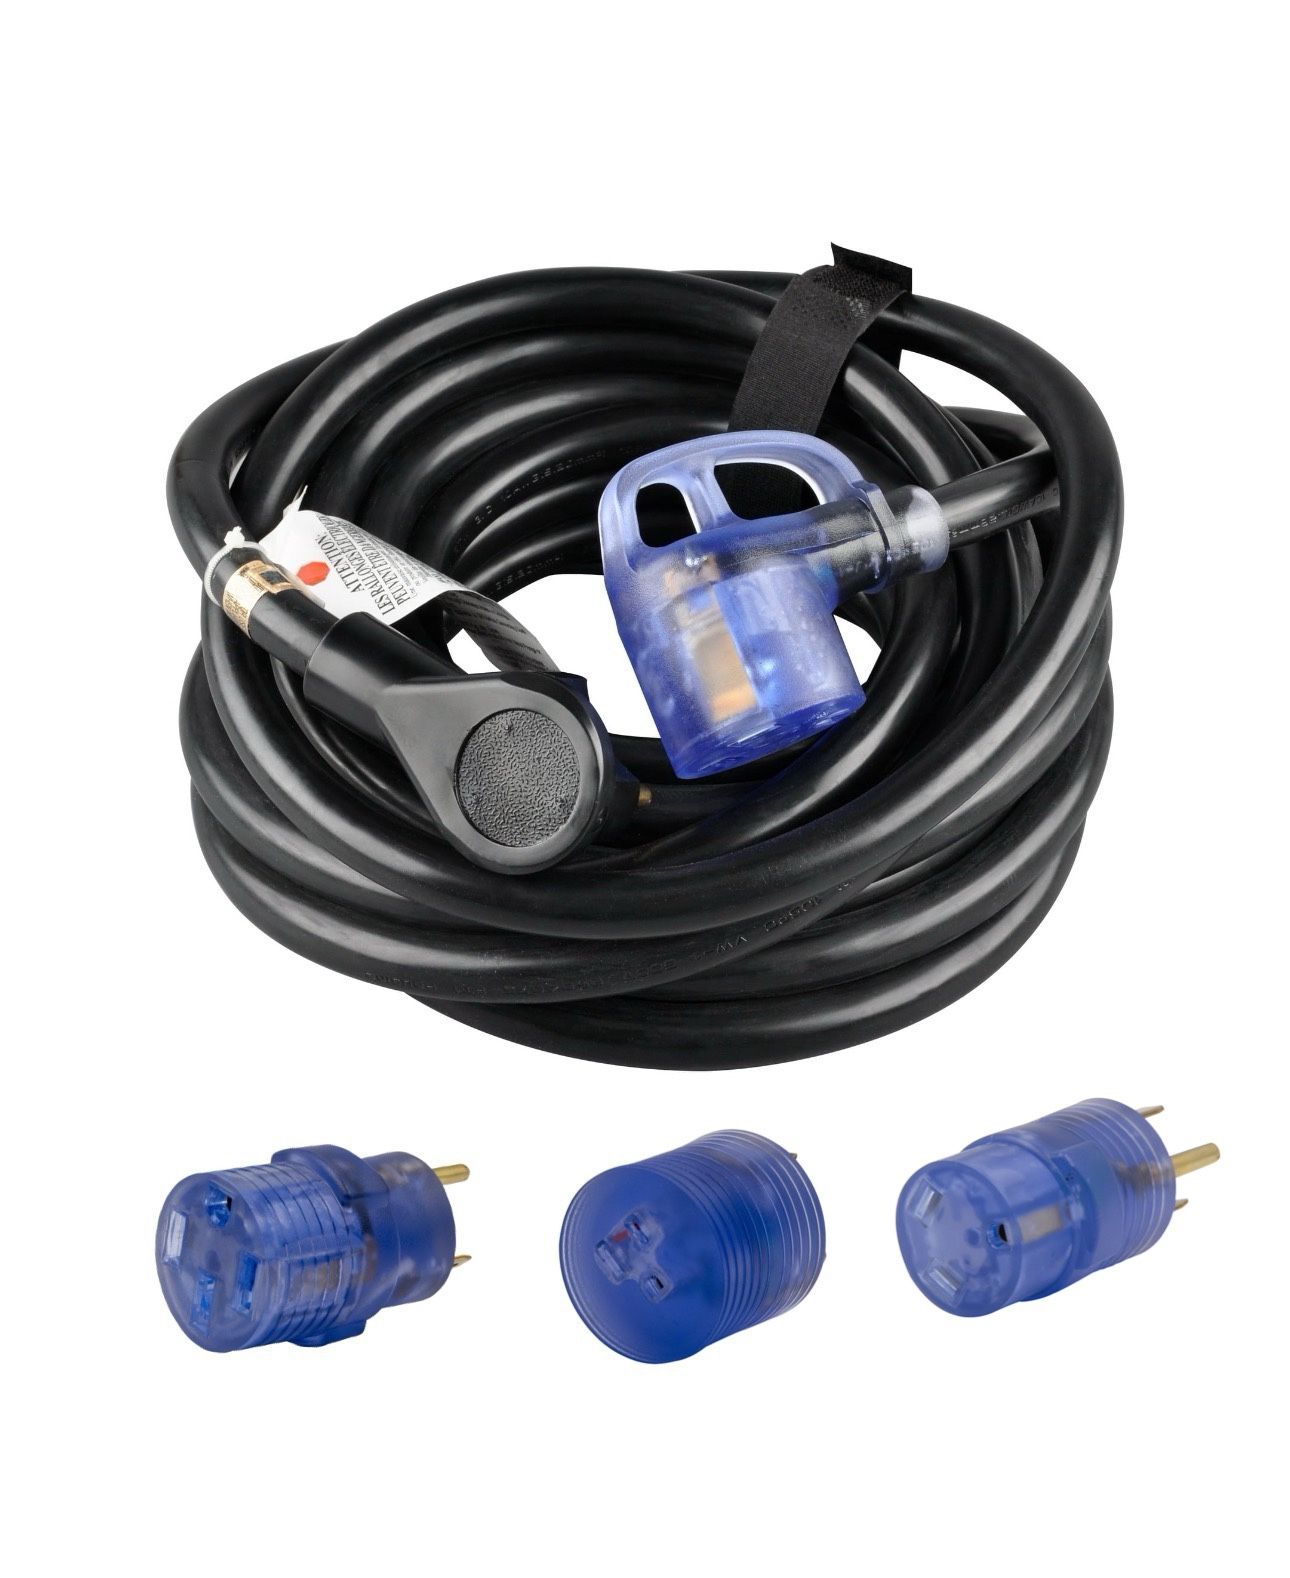 AutoDrive 10/3 STW 30 Amps RV Extension Cord with Lighted End, 30-feet, Black with 3 Adapters